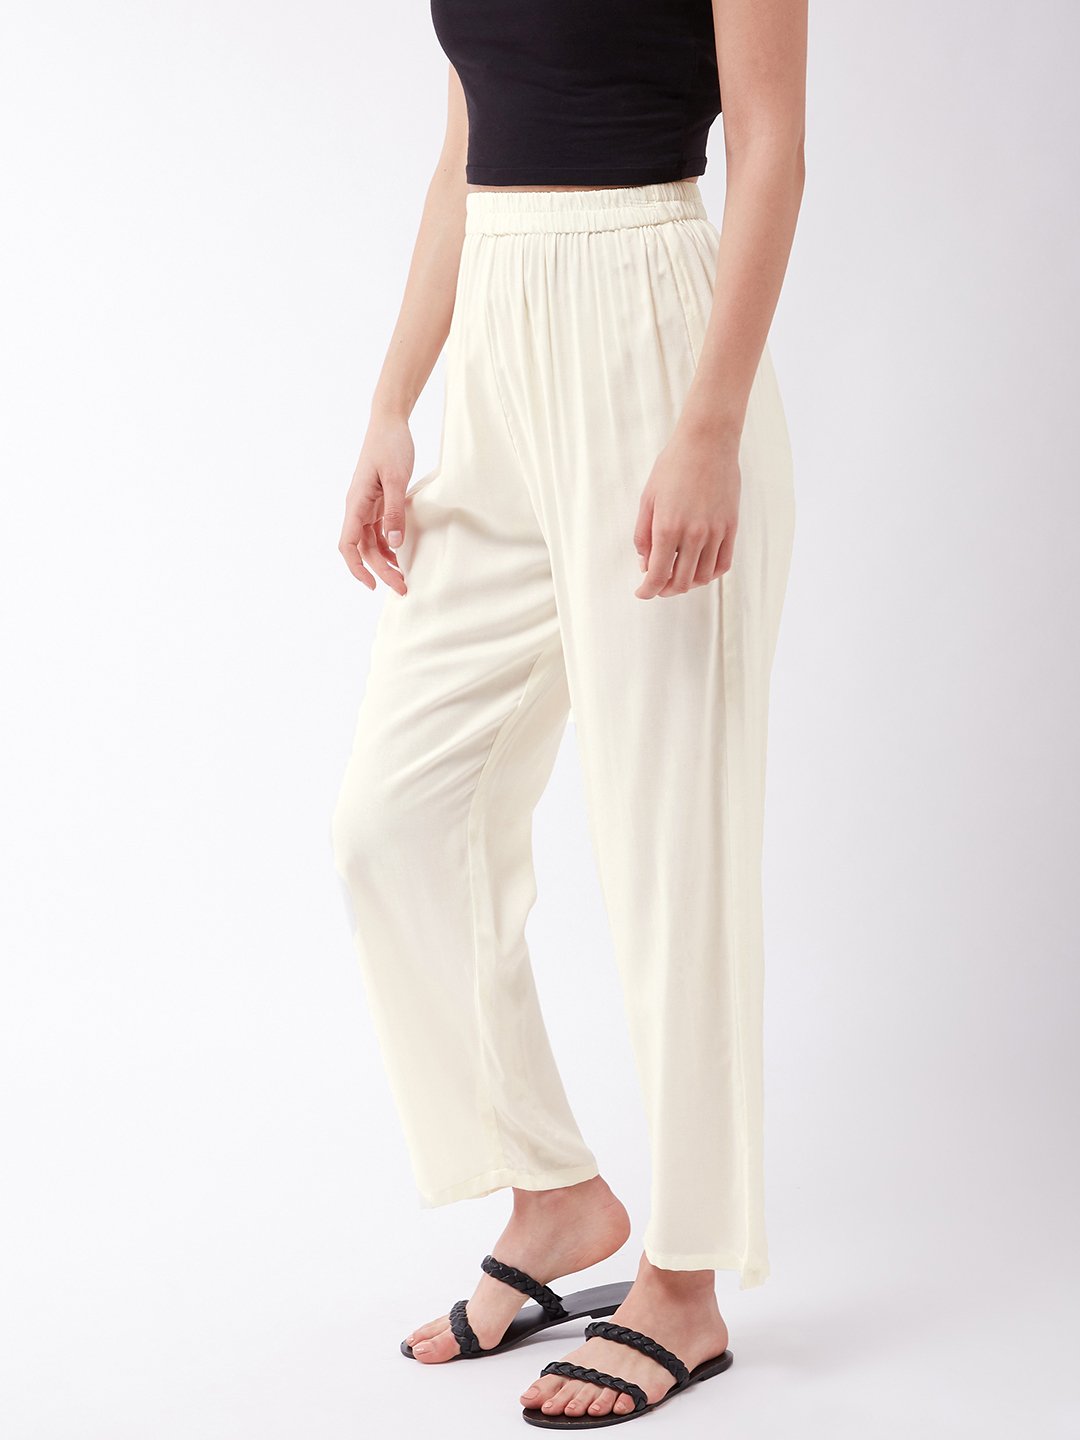 H&M+ Low-waisted parachute trousers - Cream - Ladies | H&M